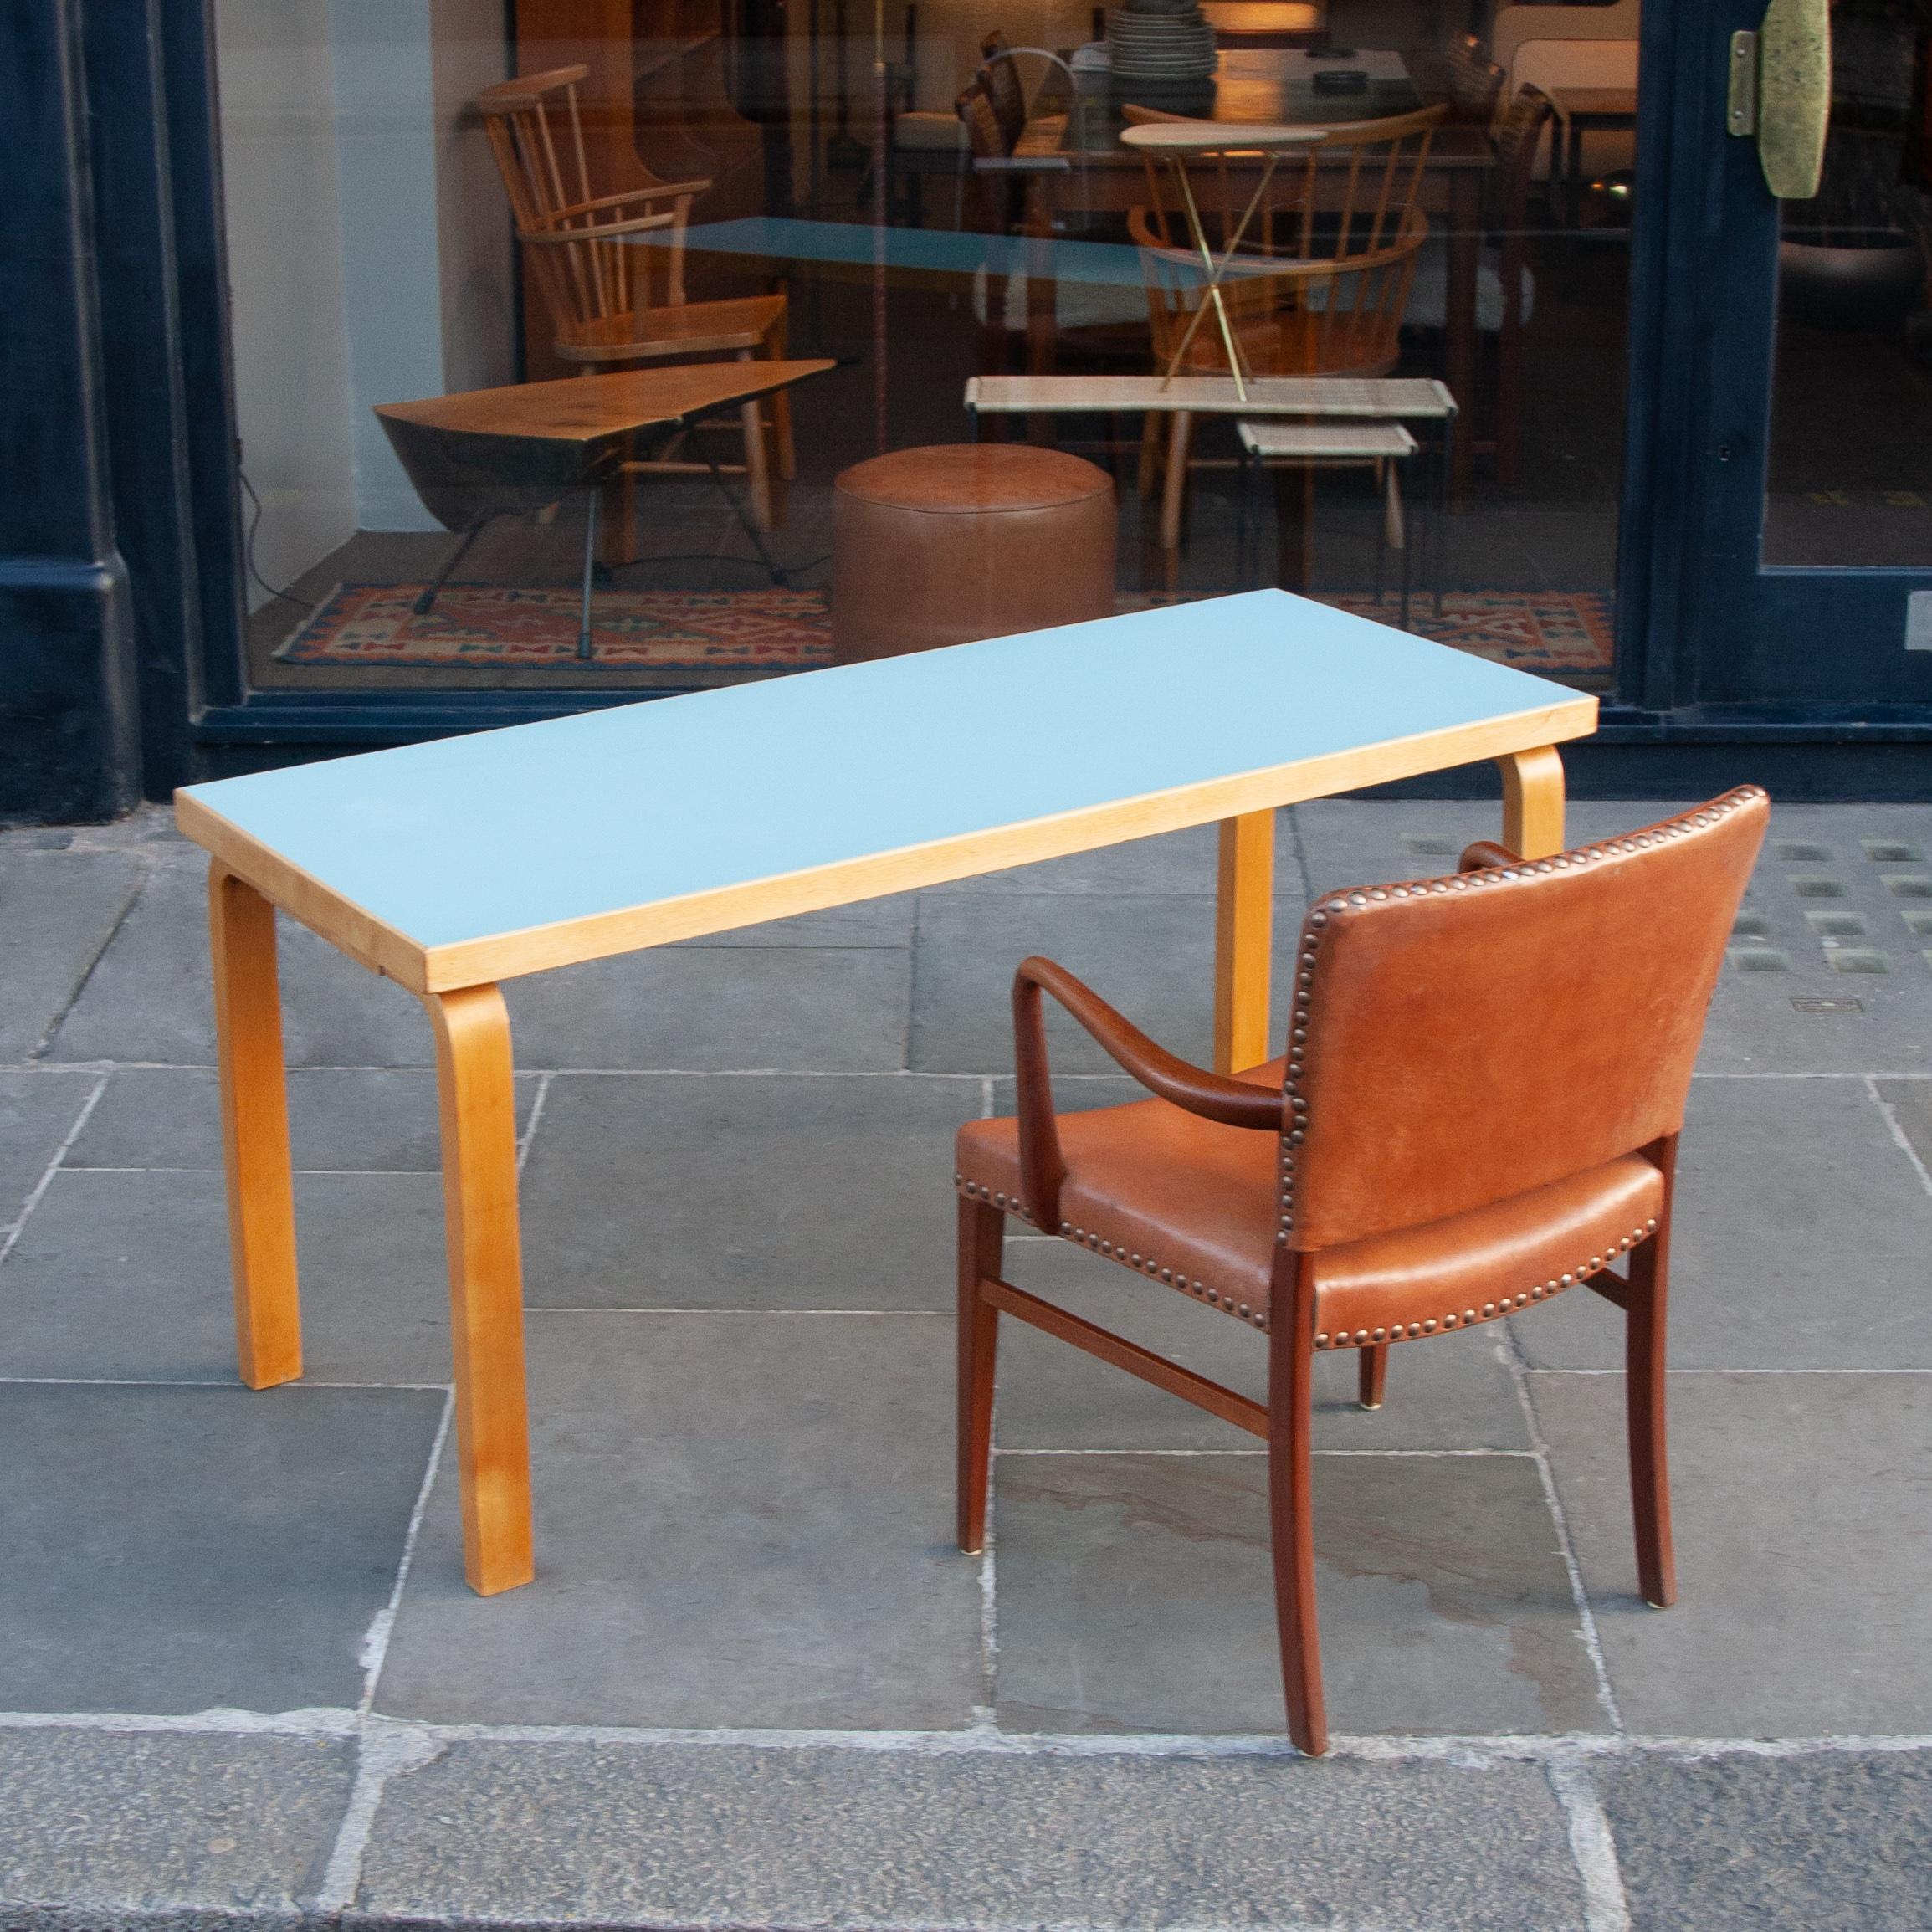 This writing desk or kitchen table is a fine example of designer Alvar Aalto’s bentwood furniture design, produced by his Artek workshop. The unusually narrow proportions of the piece, suggest this was a bespoke commission for a private collector.